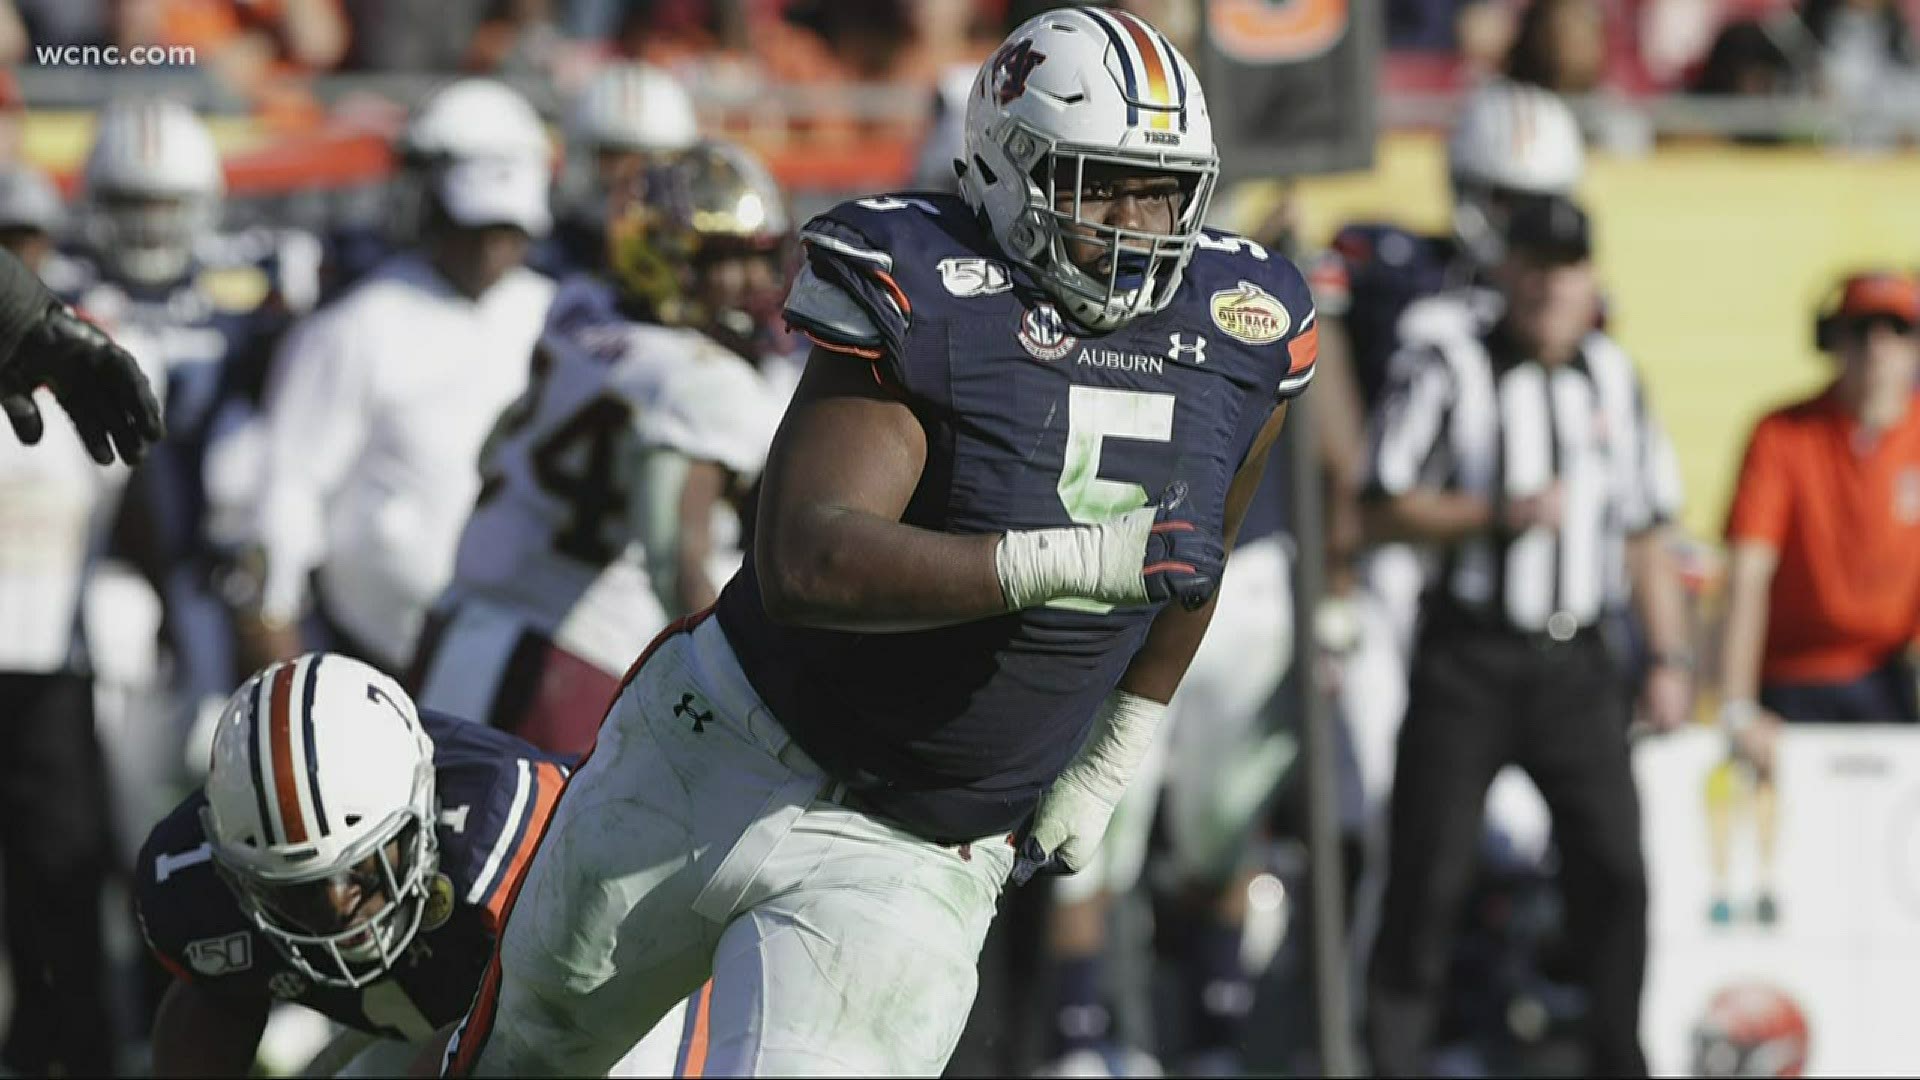 Auburn defensive tackle, the 2019 SEC Defensive Player of the Year, was picked by the Panthers with the seventh overall pick in the 2020 NFL Draft.